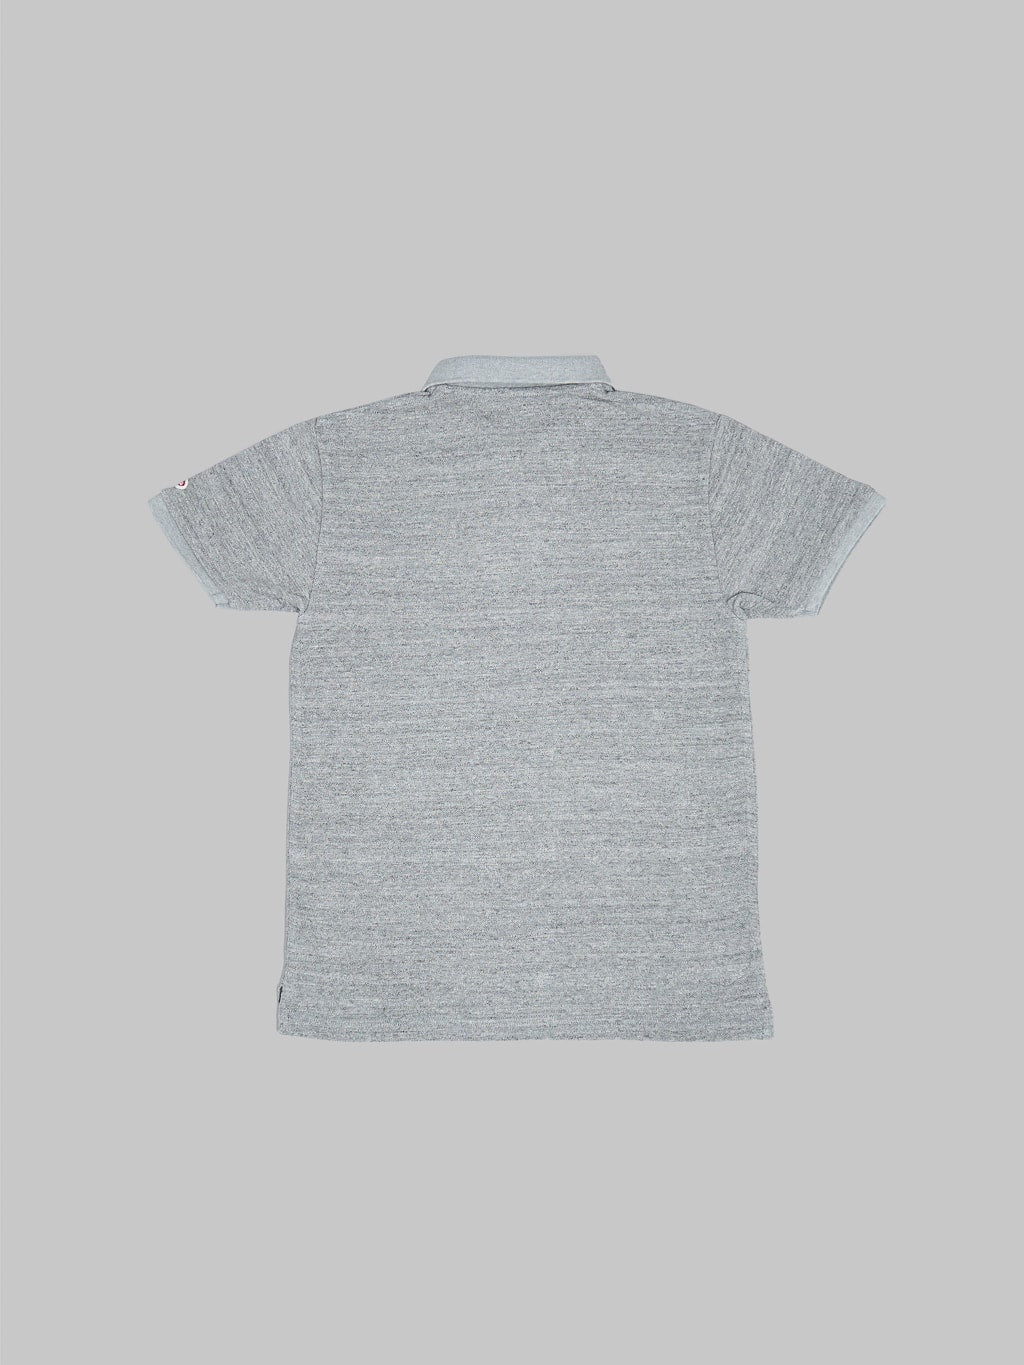 ues polo shirt grey back view